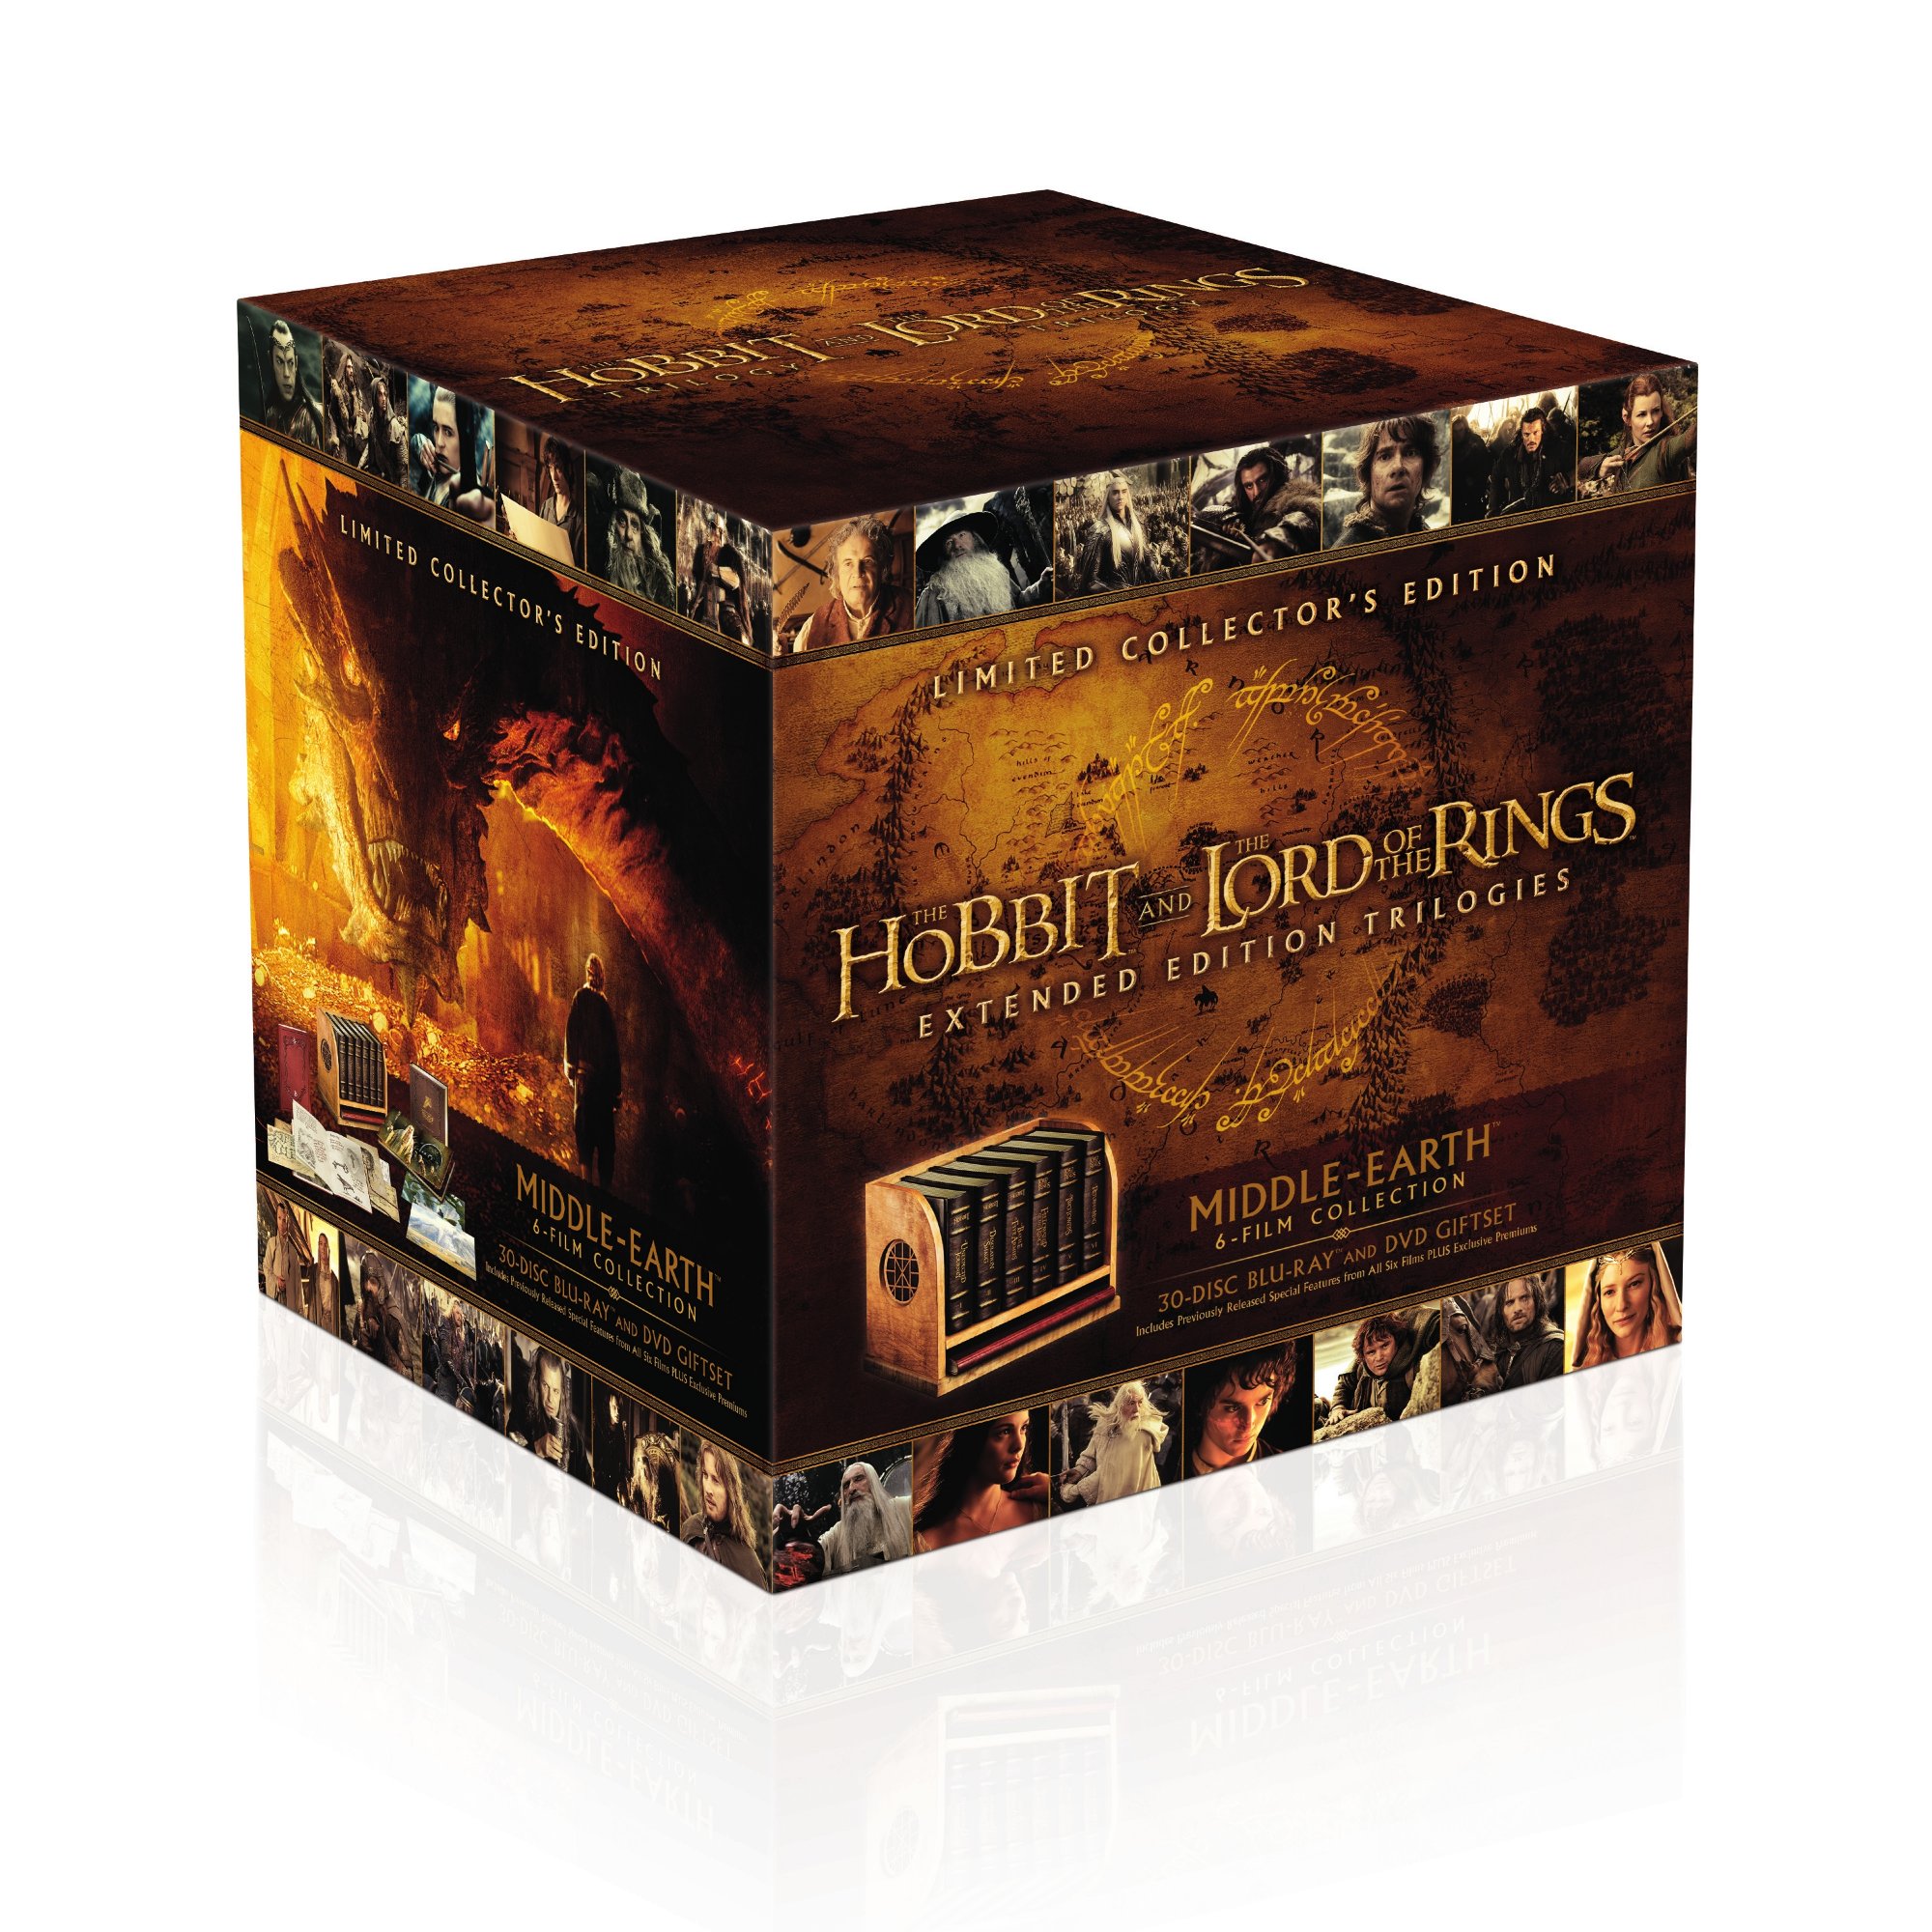 he lord of the rings extended trilogy blu-ray